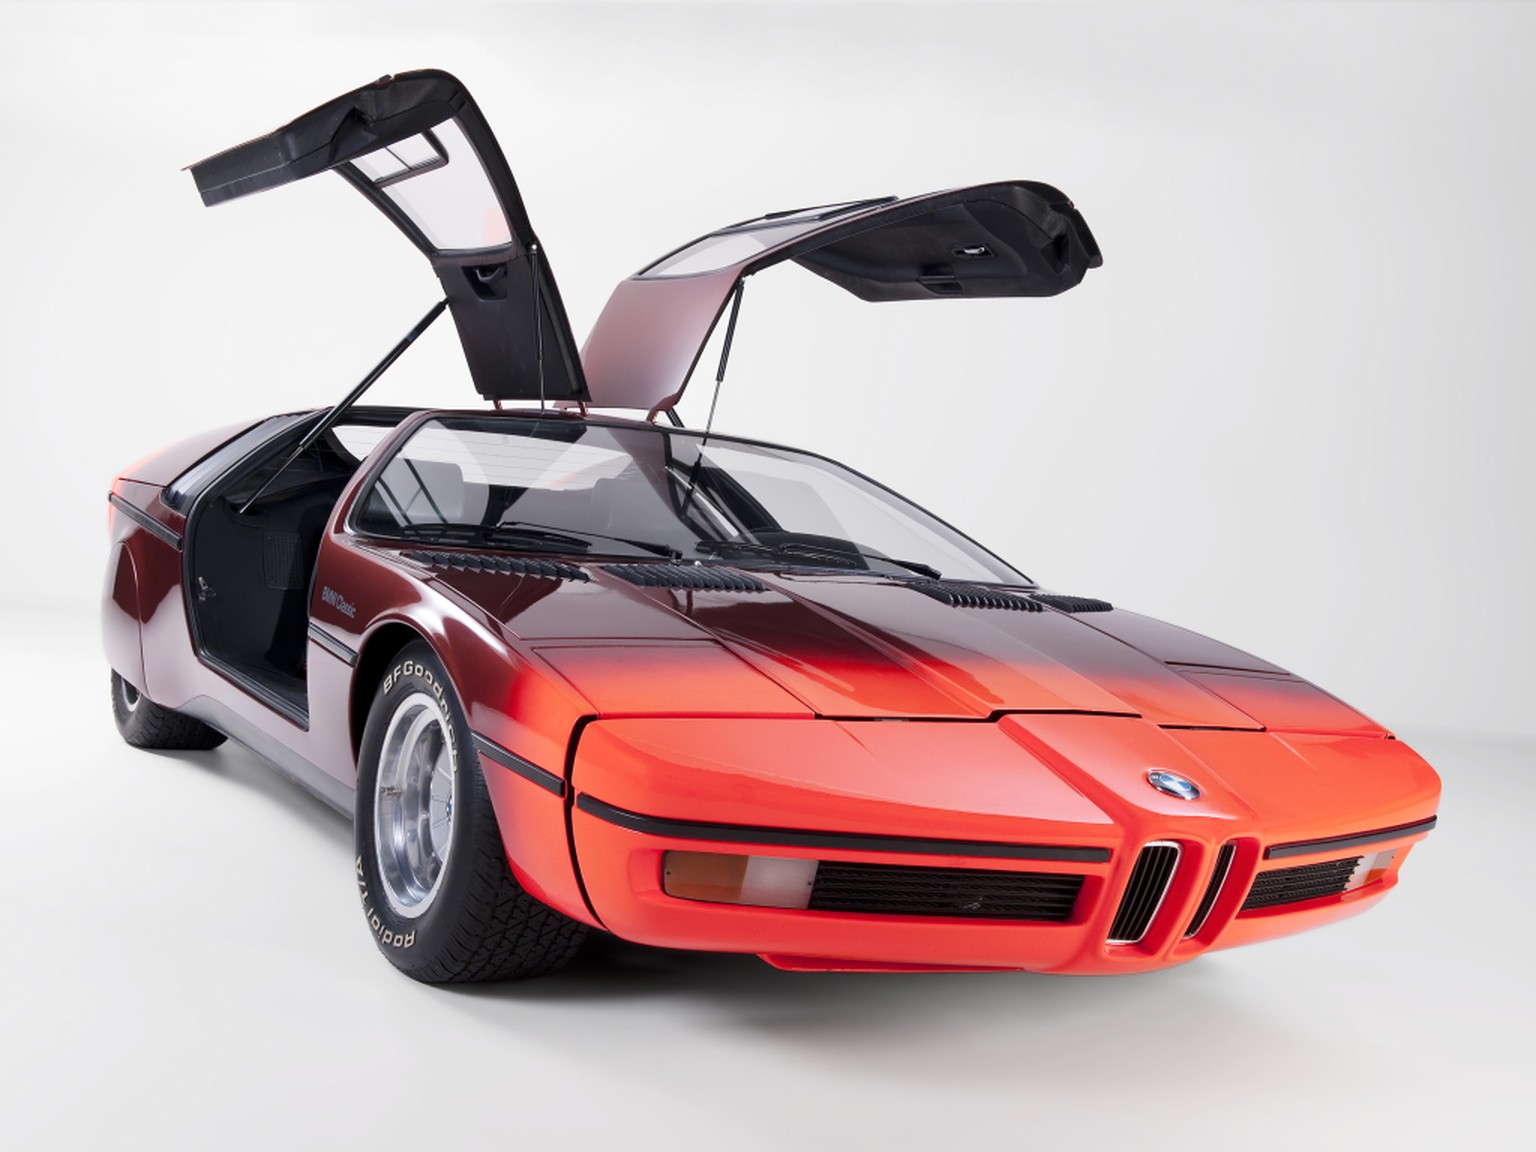 1972 bmw turbo concept http://en.wheelsage.org/bmw/car774/pictures/x8xy1f/